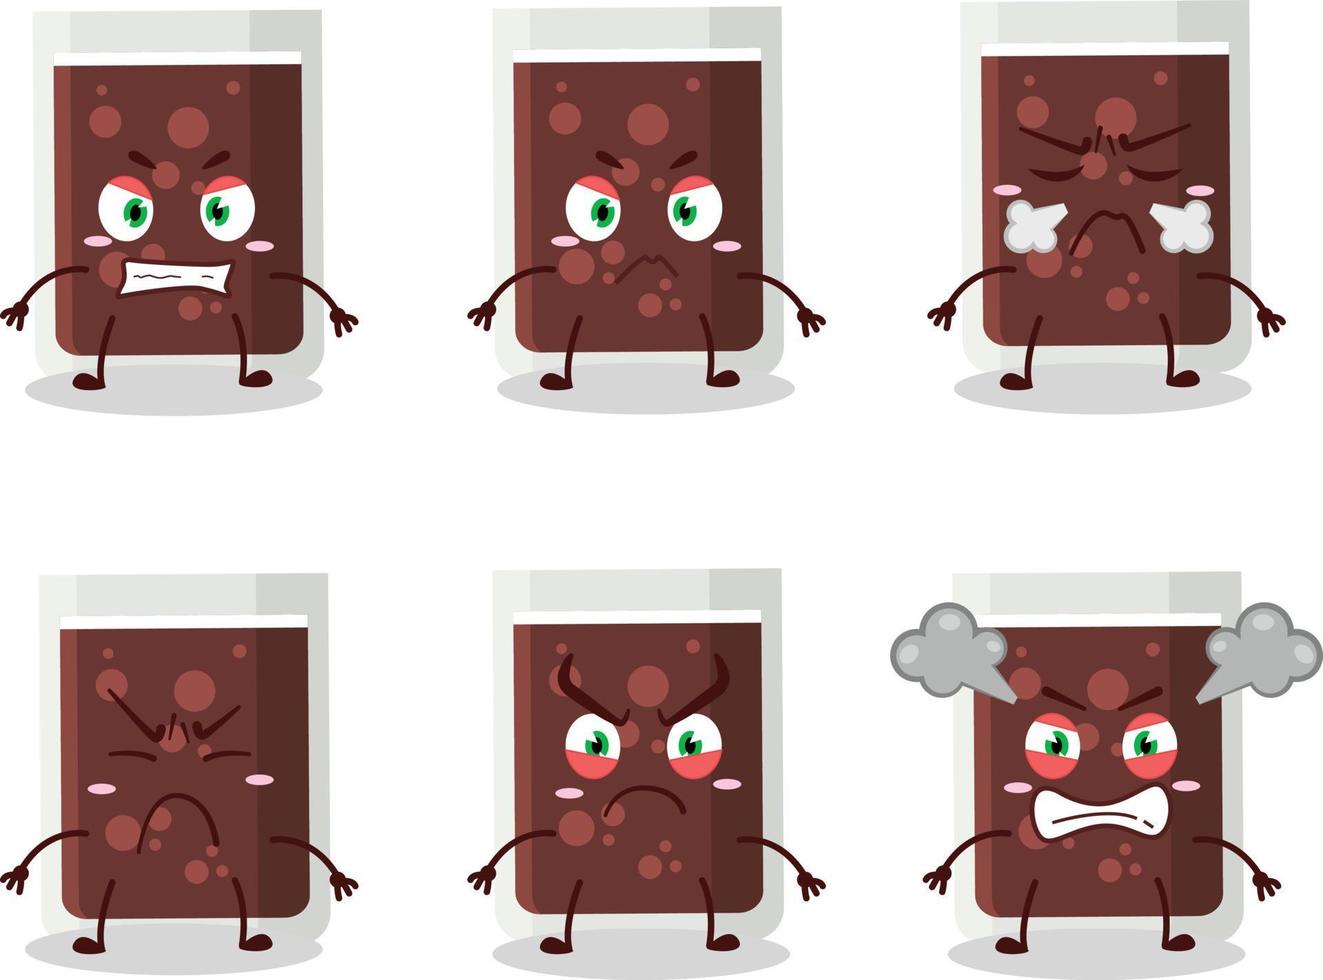 Glass of cola cartoon character with various angry expressions vector